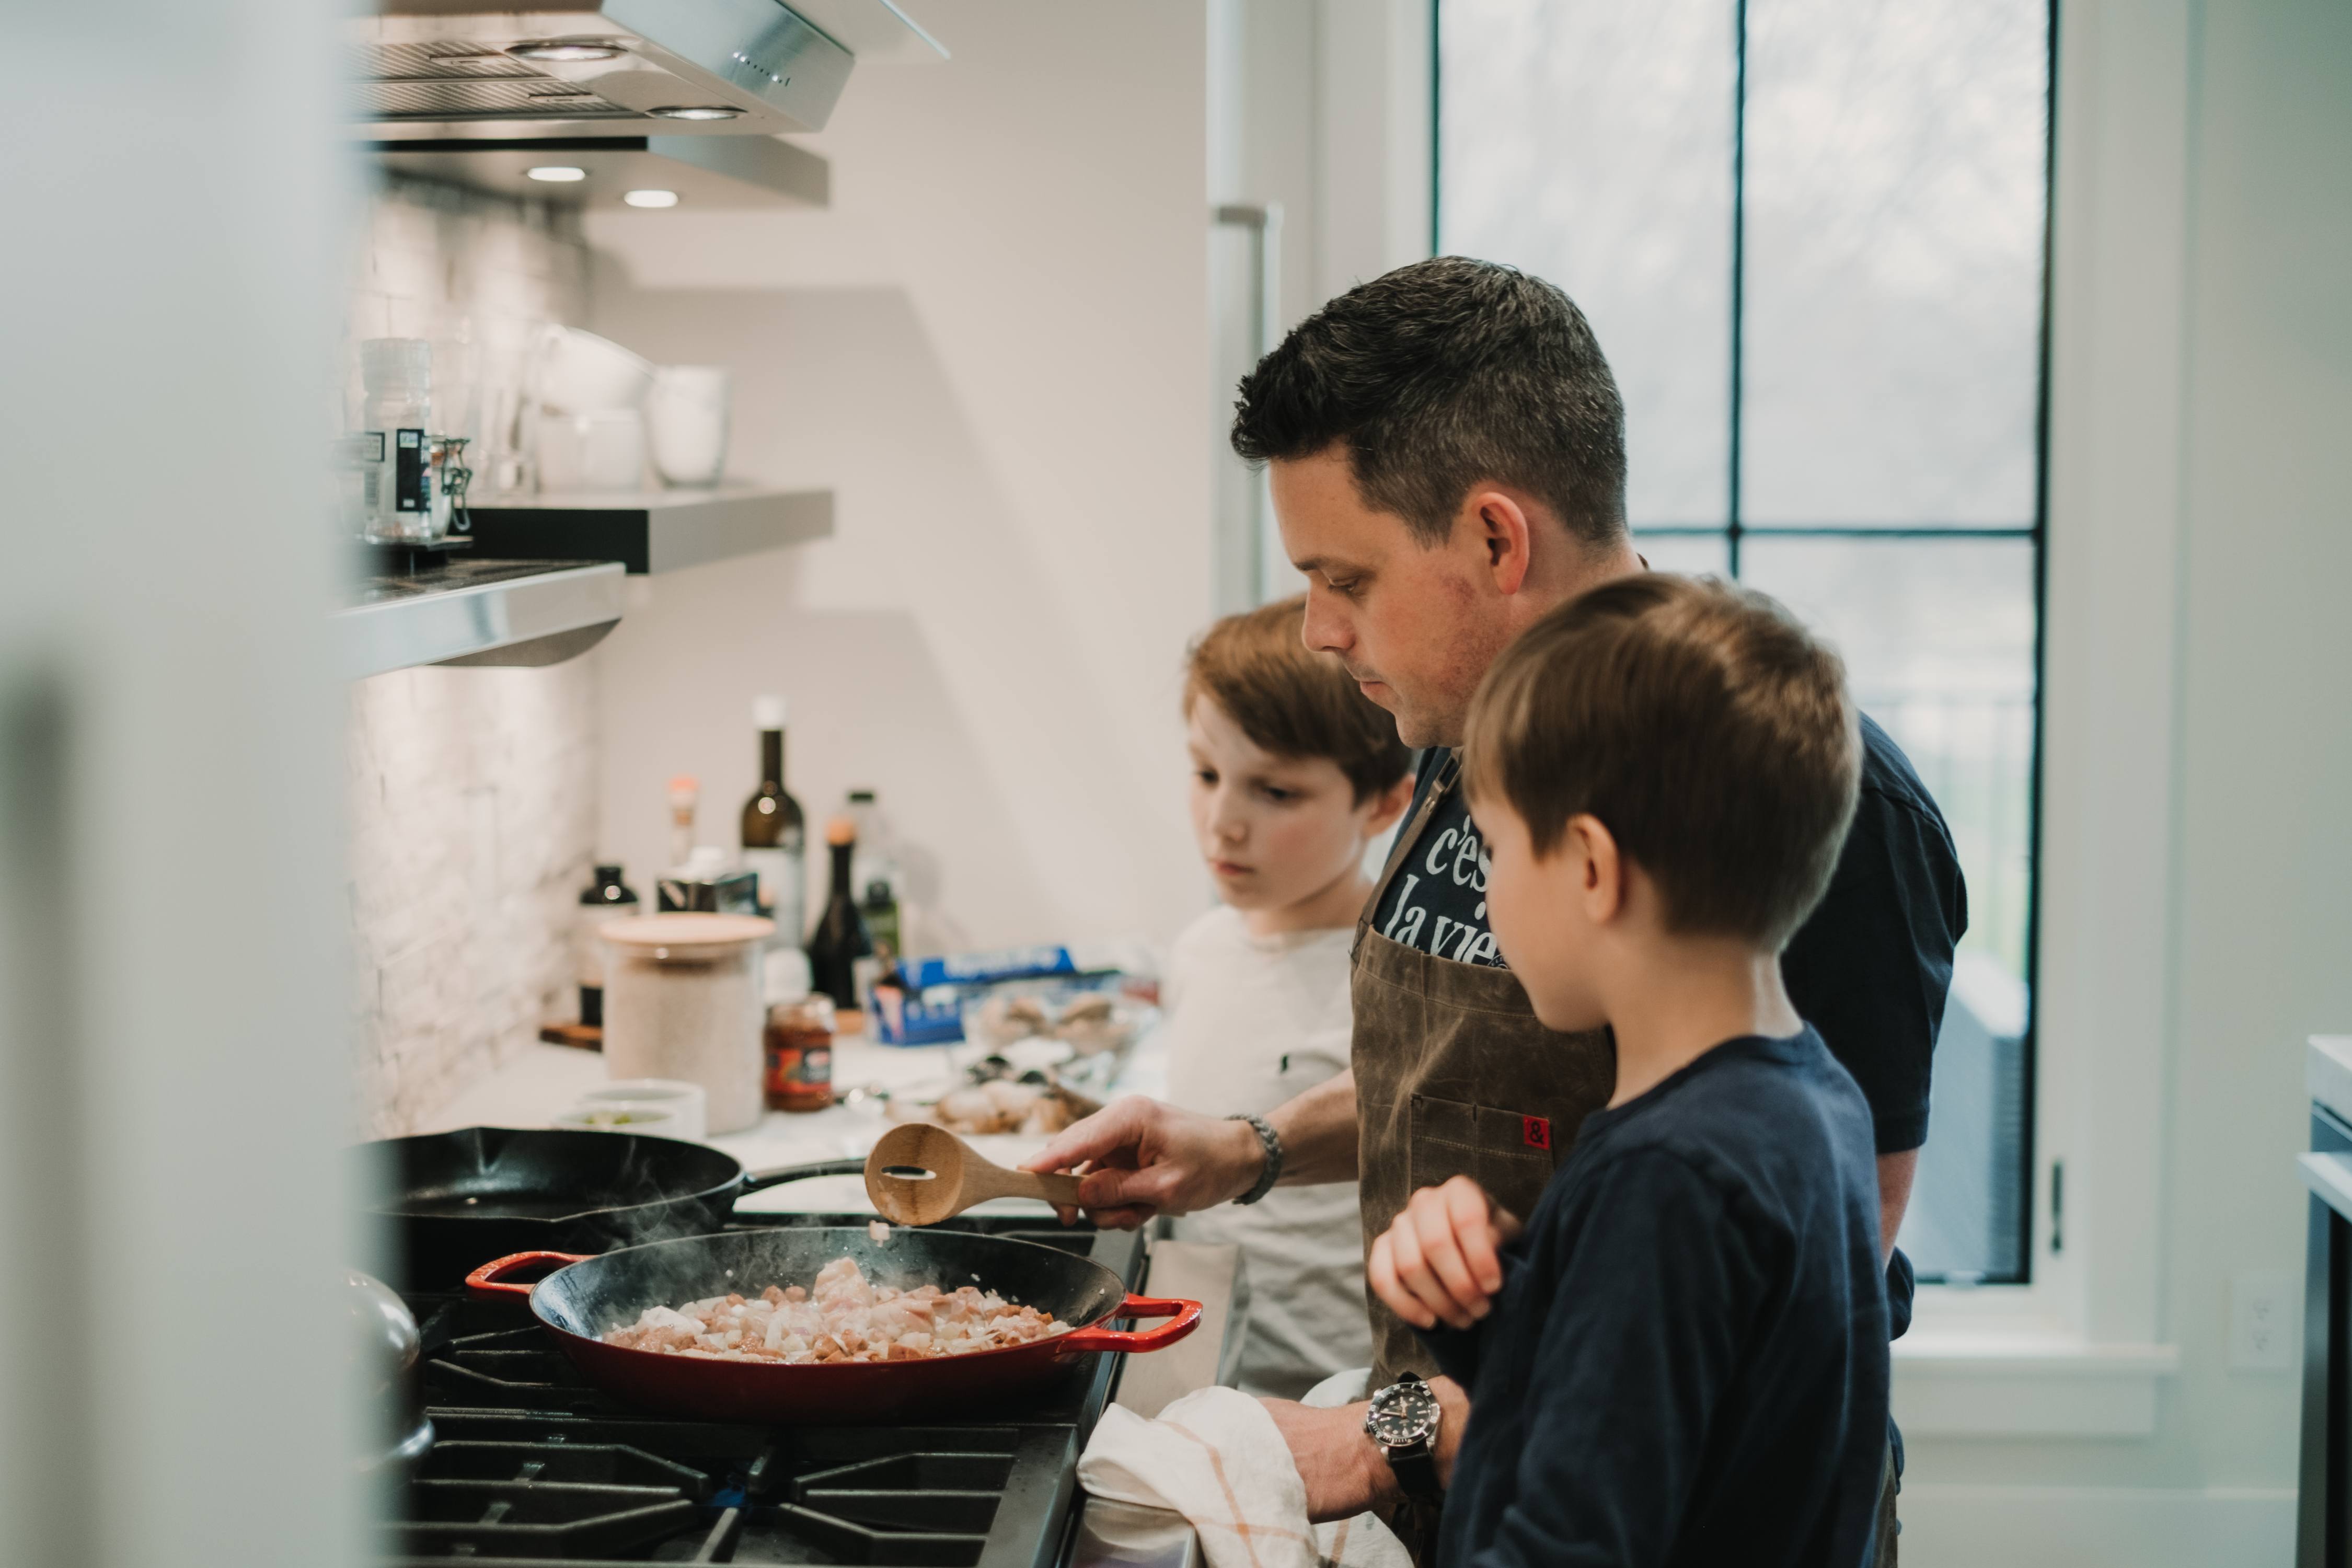 Gavin Kaysen cooks with kids during covid-19 isolation April 2020